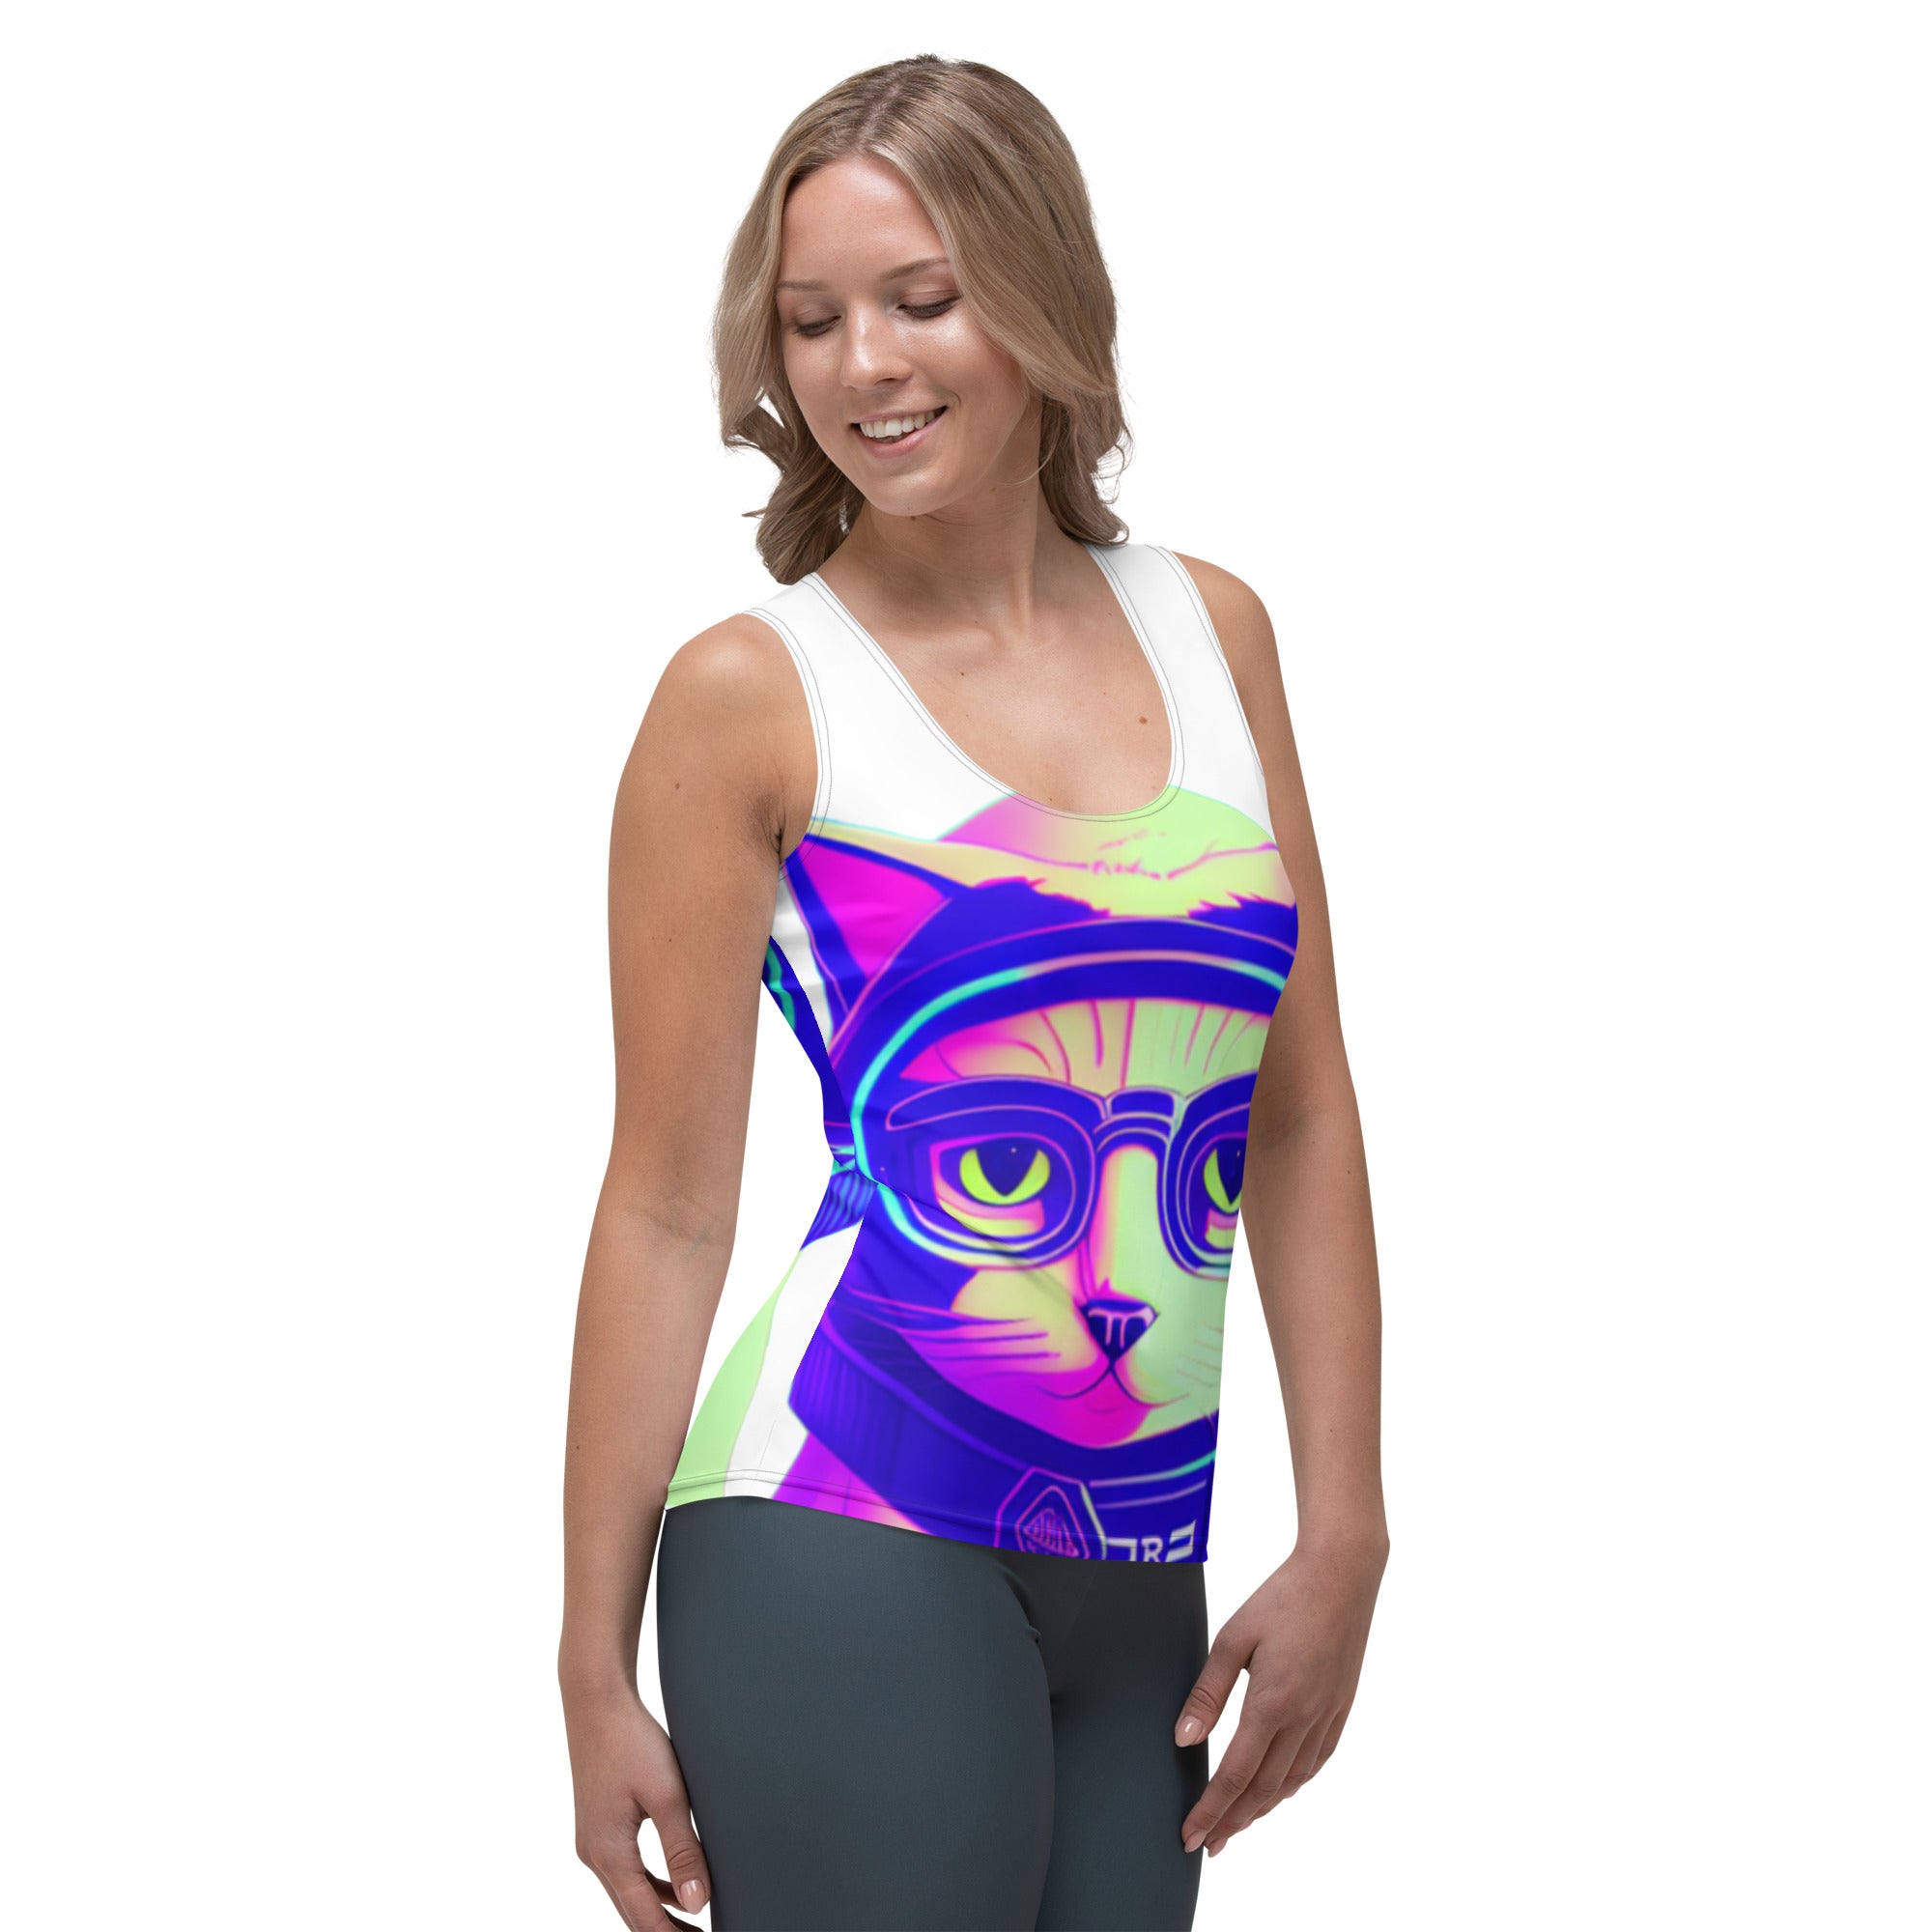 Sublimation Cut & Sew Tank Top - Cat Goggles